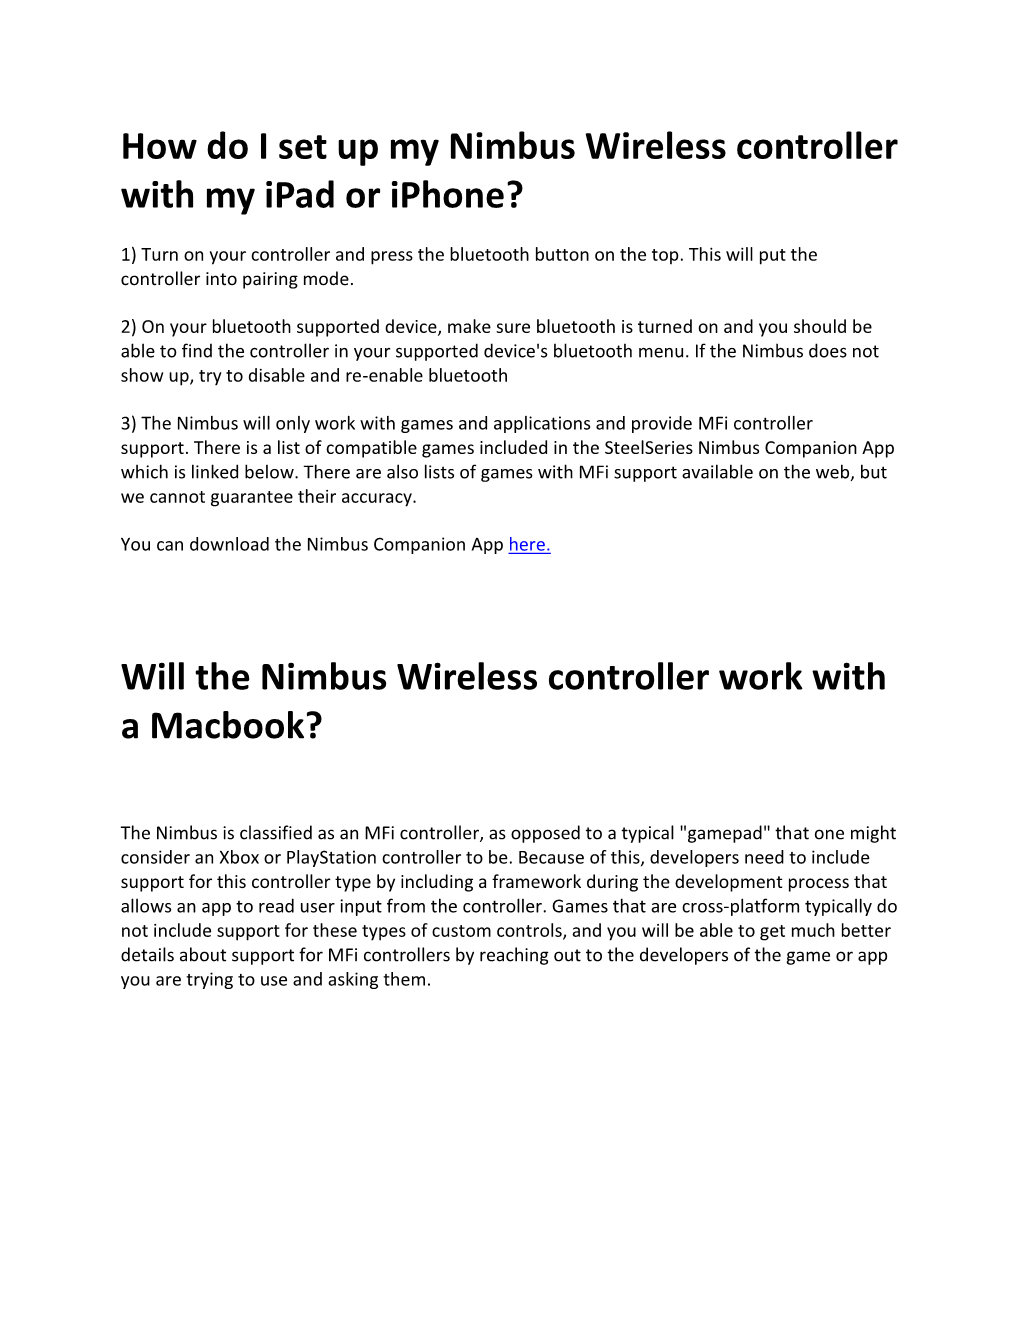 How Do I Set up My Nimbus Wireless Controller with My Ipad Or Iphone?